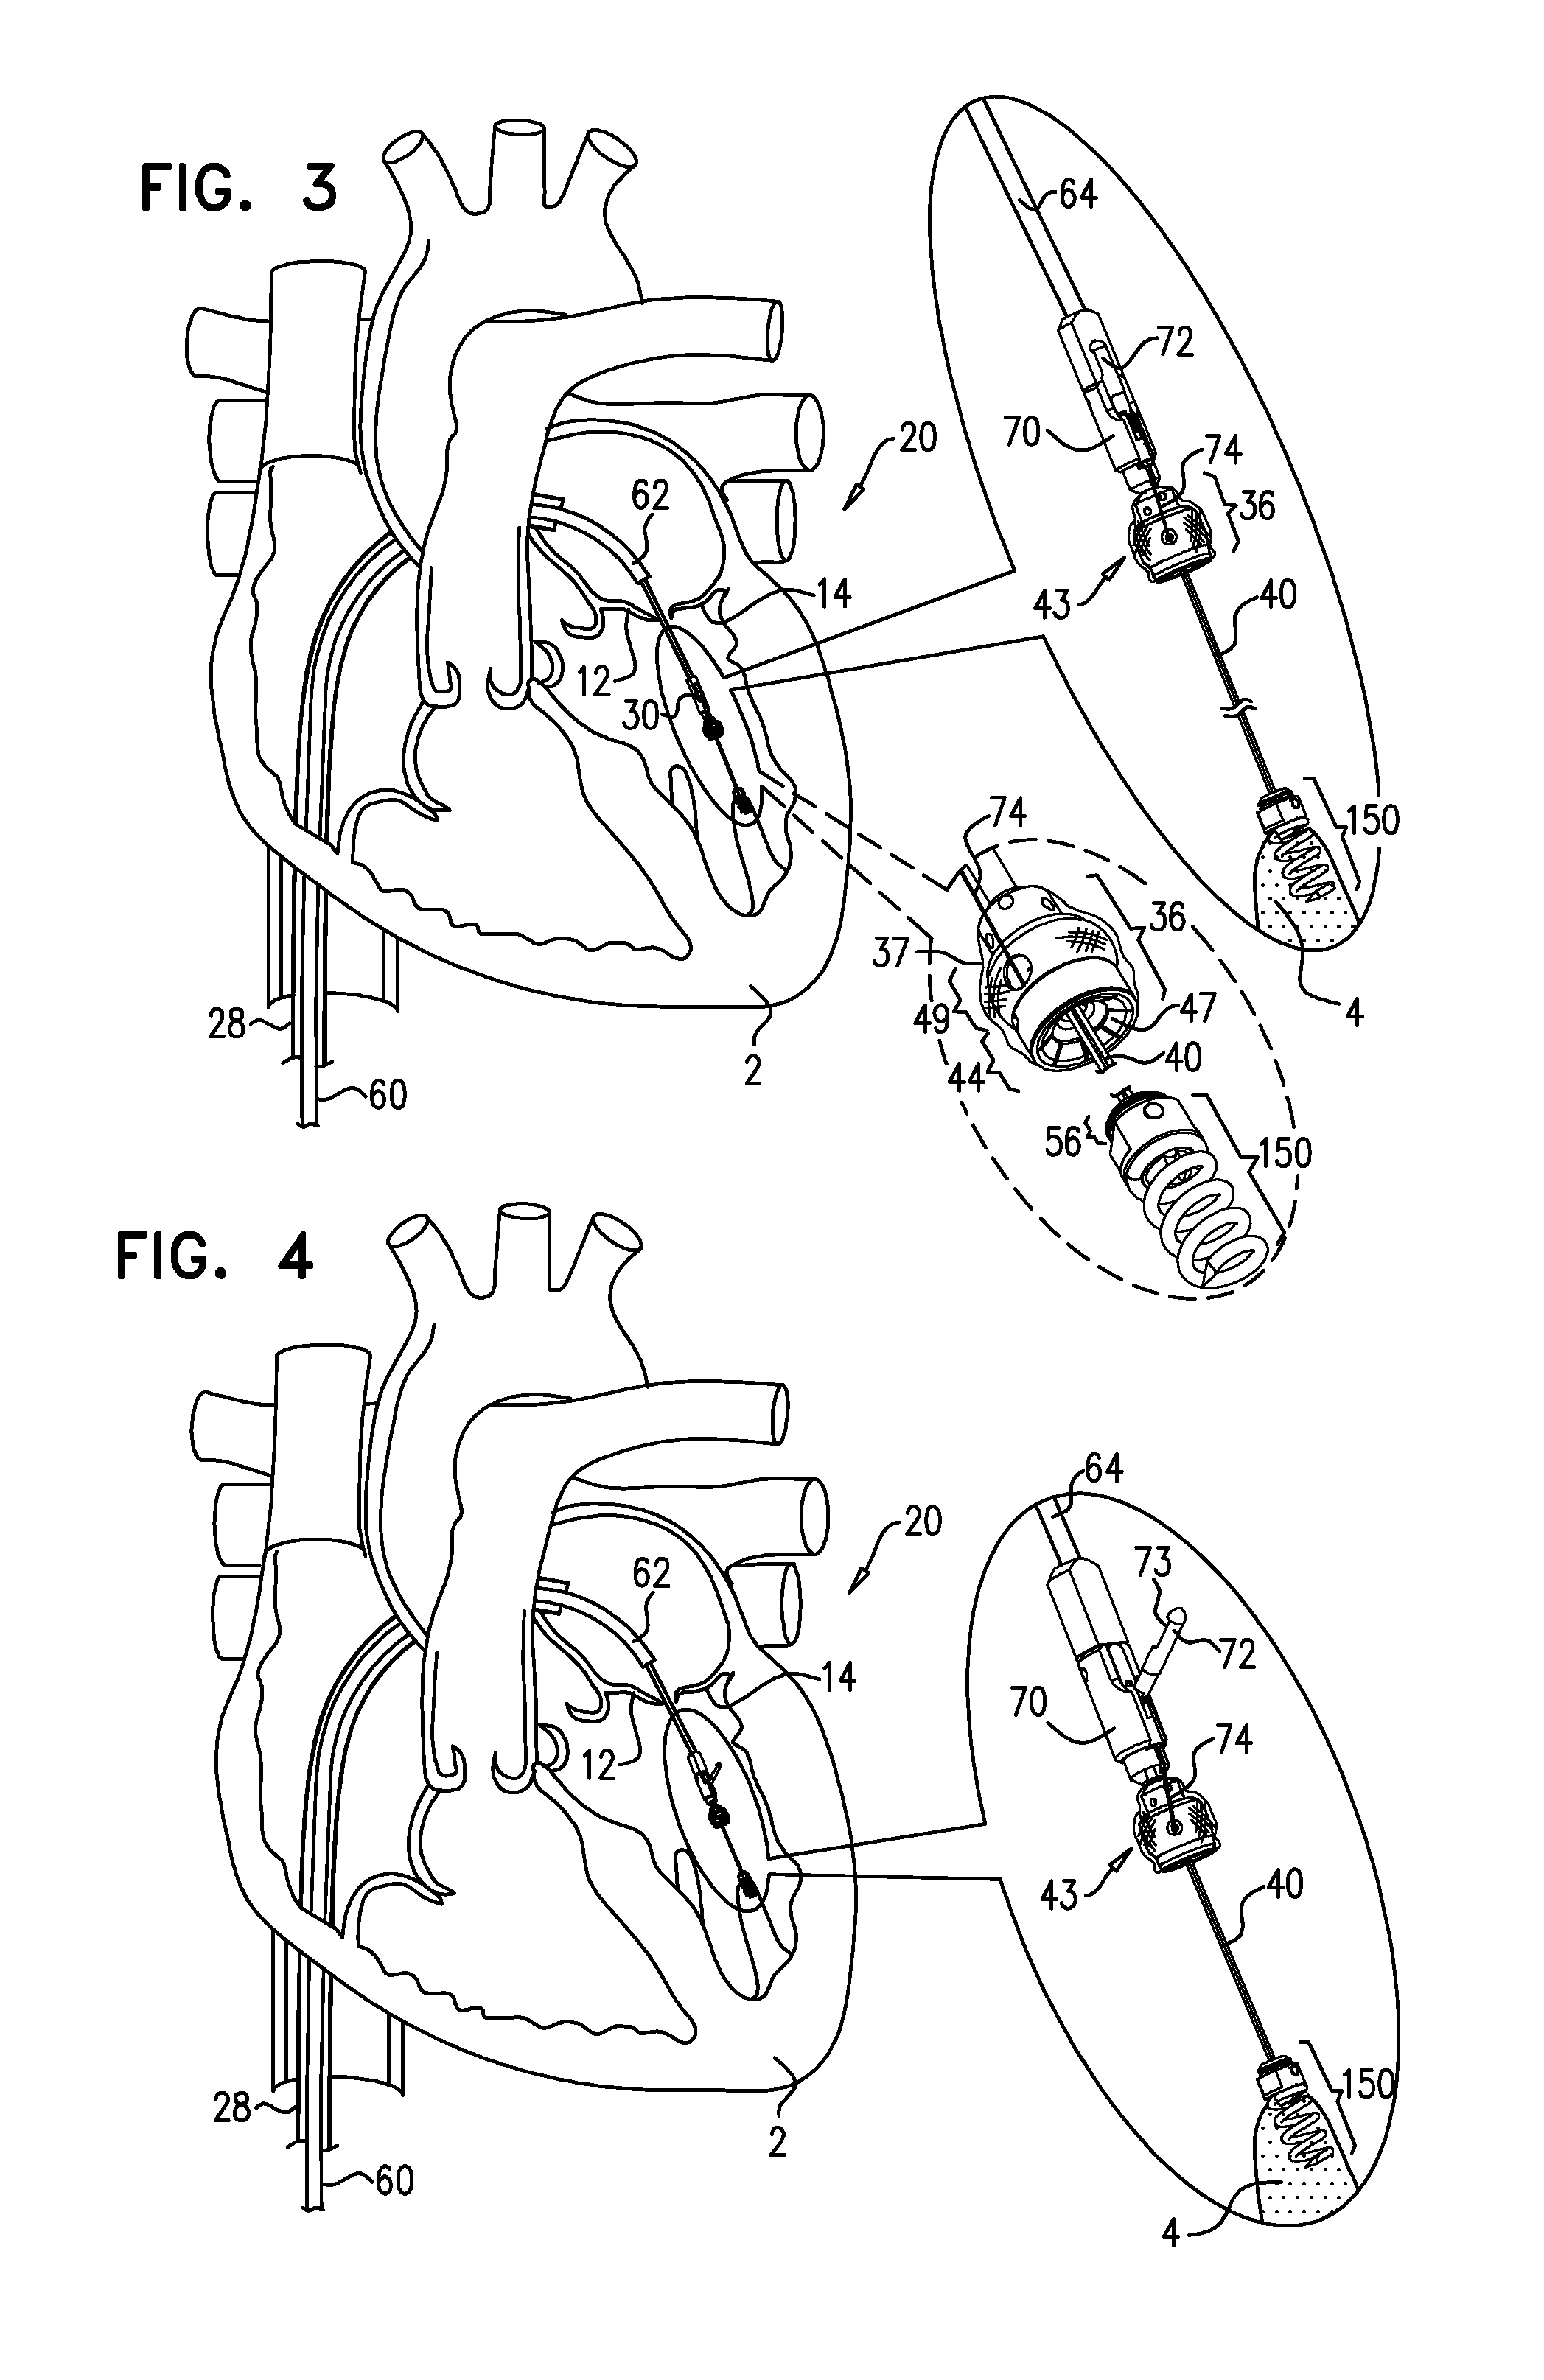 Apparatus for guide-wire based advancement of a rotation assembly